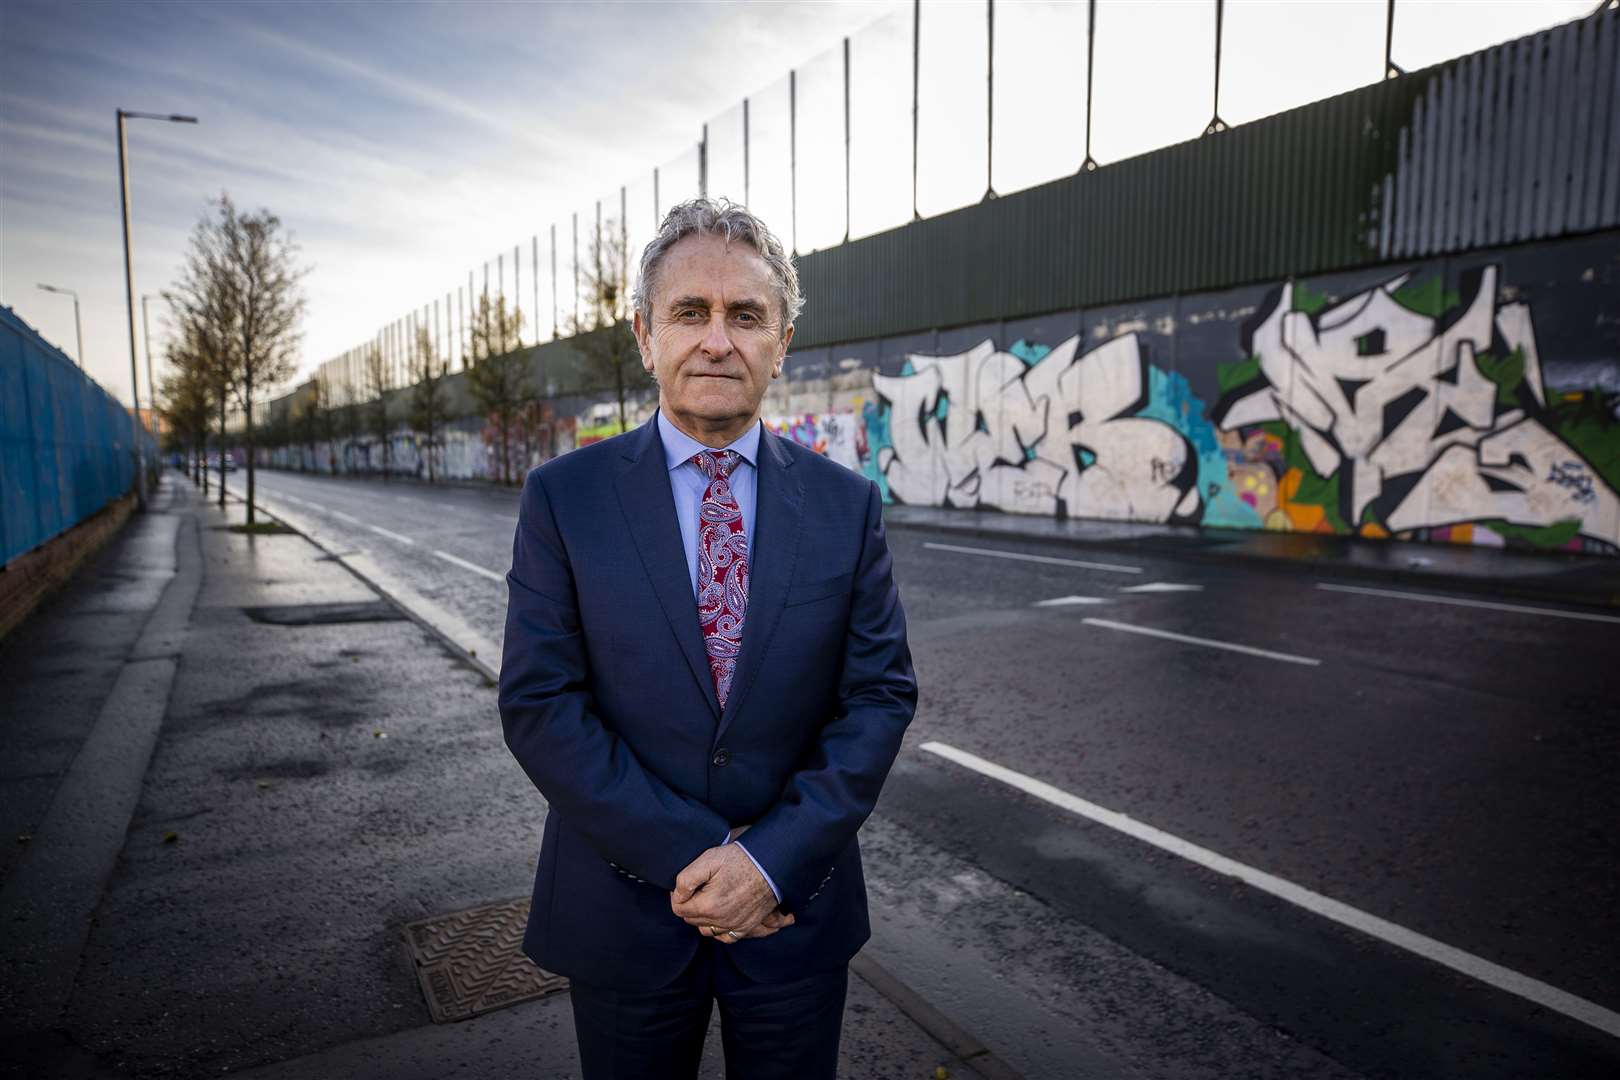 Paddy Harte, chairman of the International Fund for Ireland, at Belfast’s Peace Walls (Liam McBurney/PA)